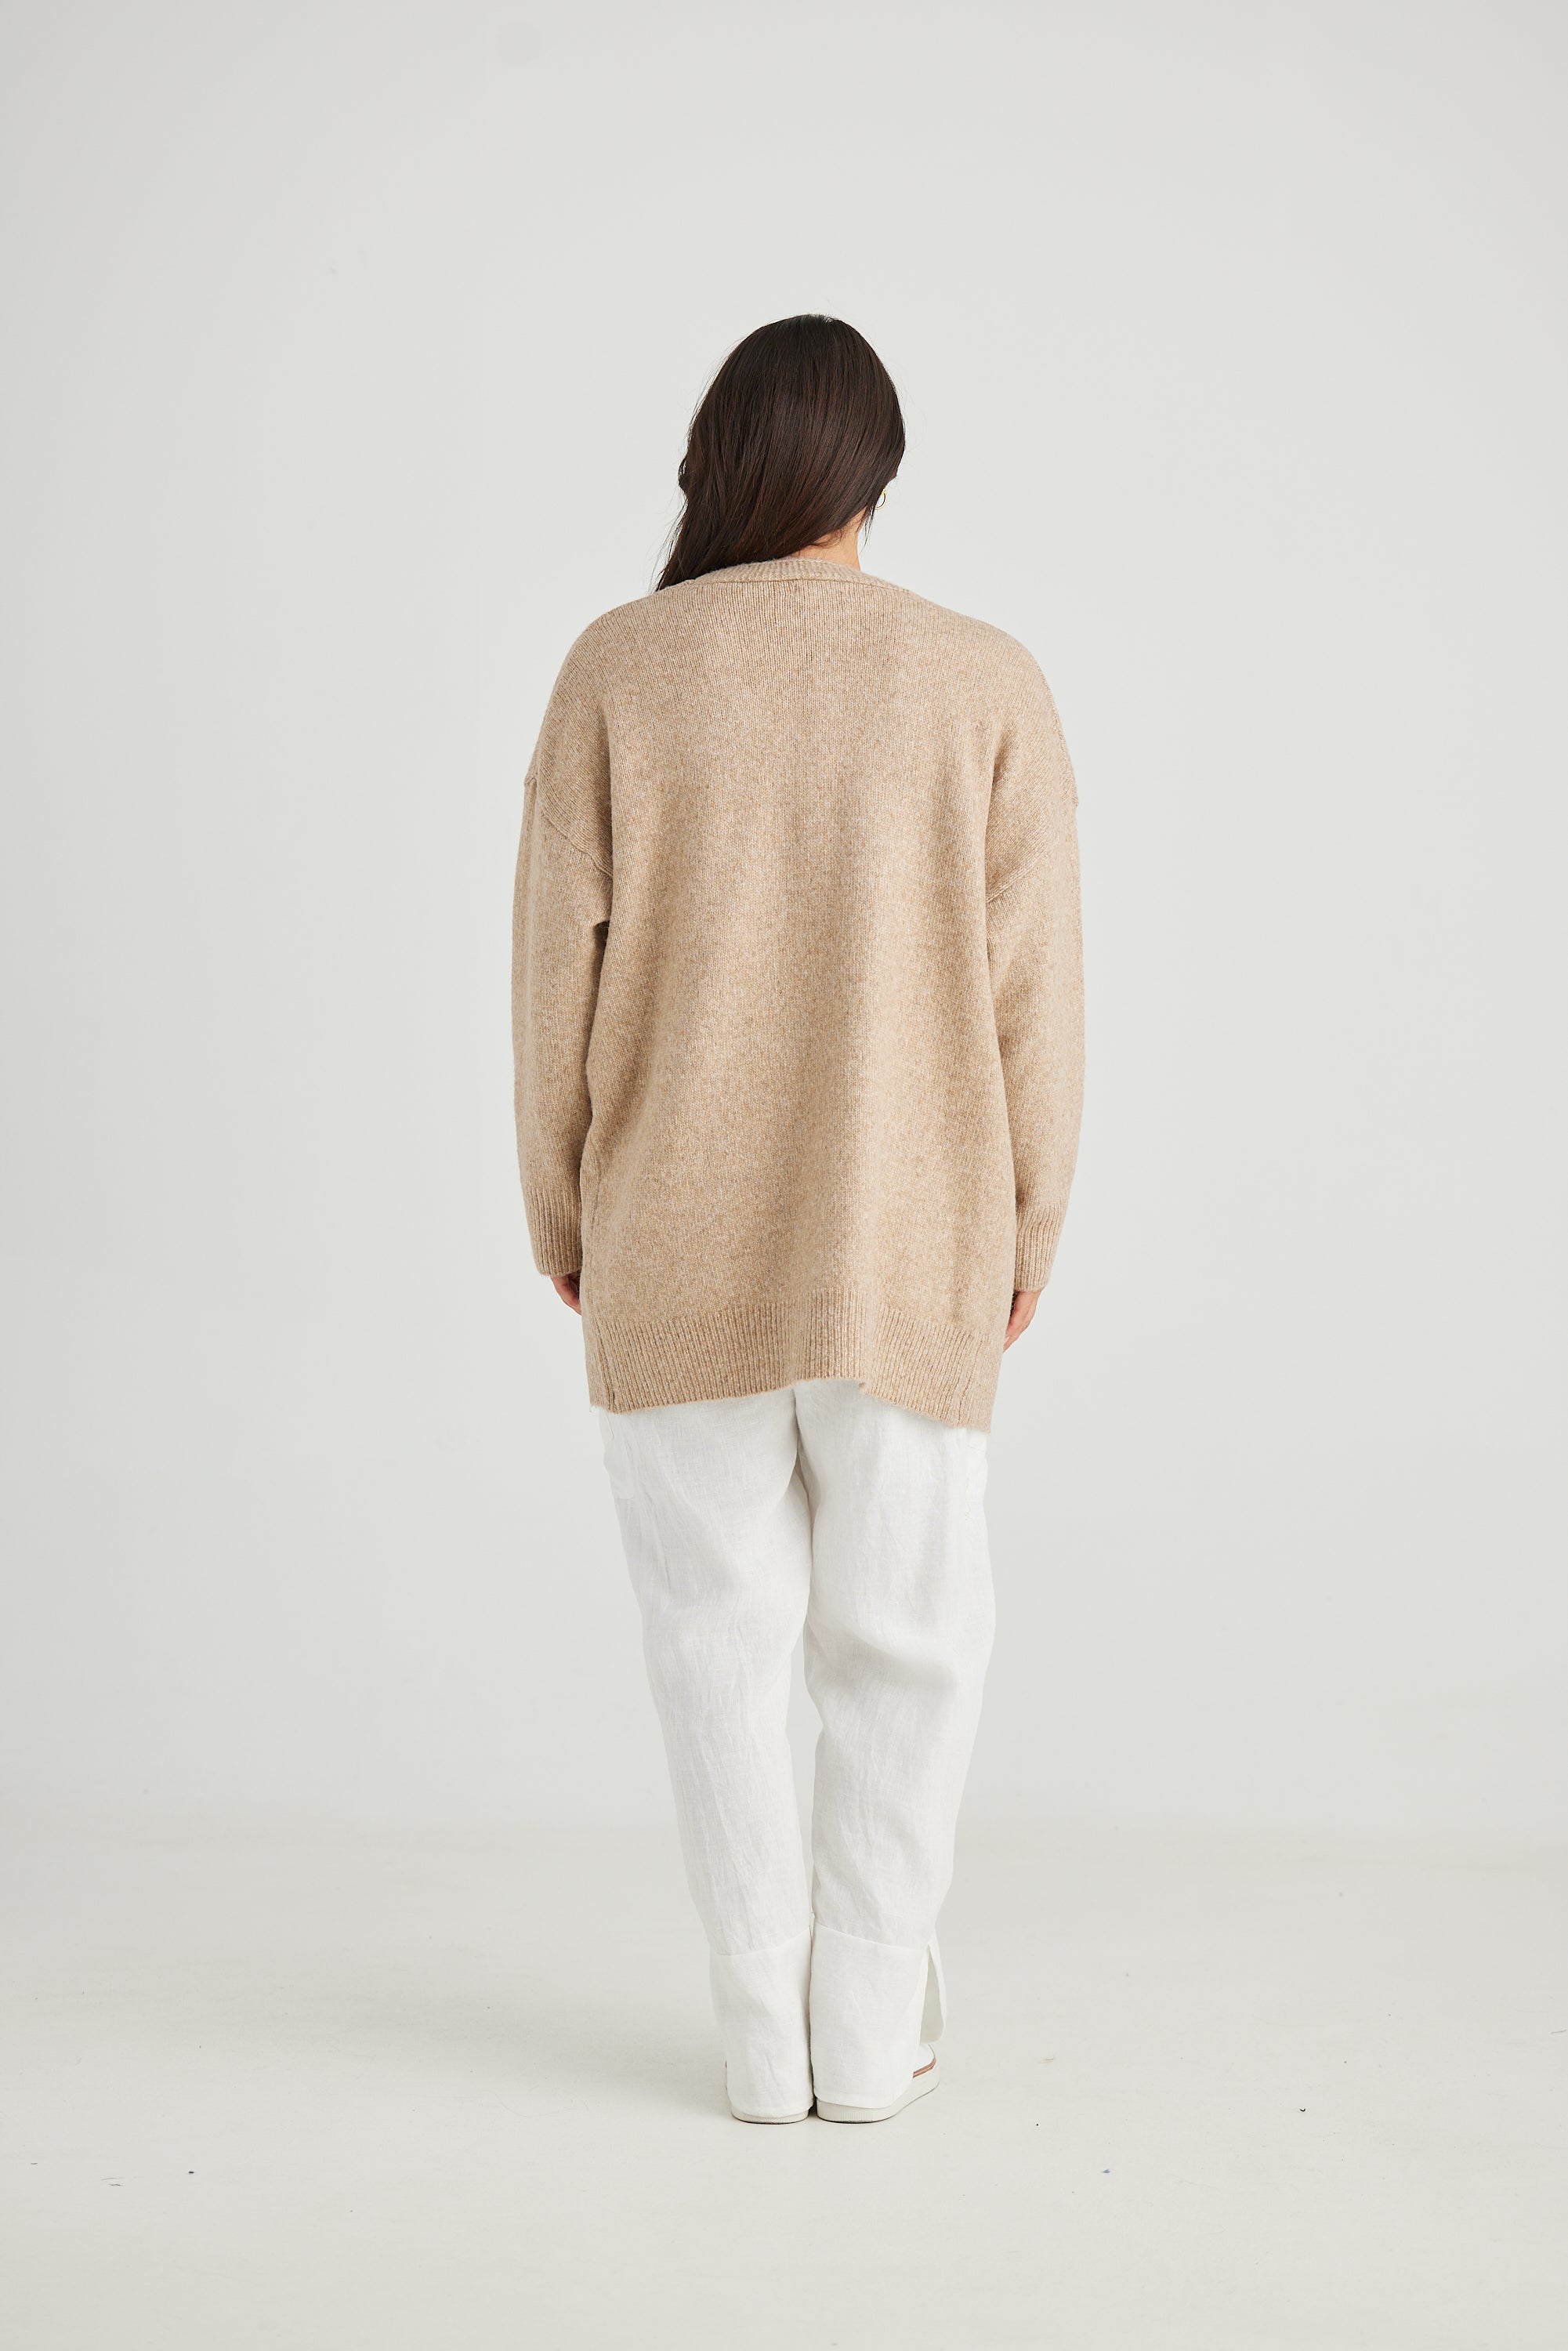 On Deck Cardi - Oatmeal-Knitwear & Jumpers-Holiday-The Bay Room